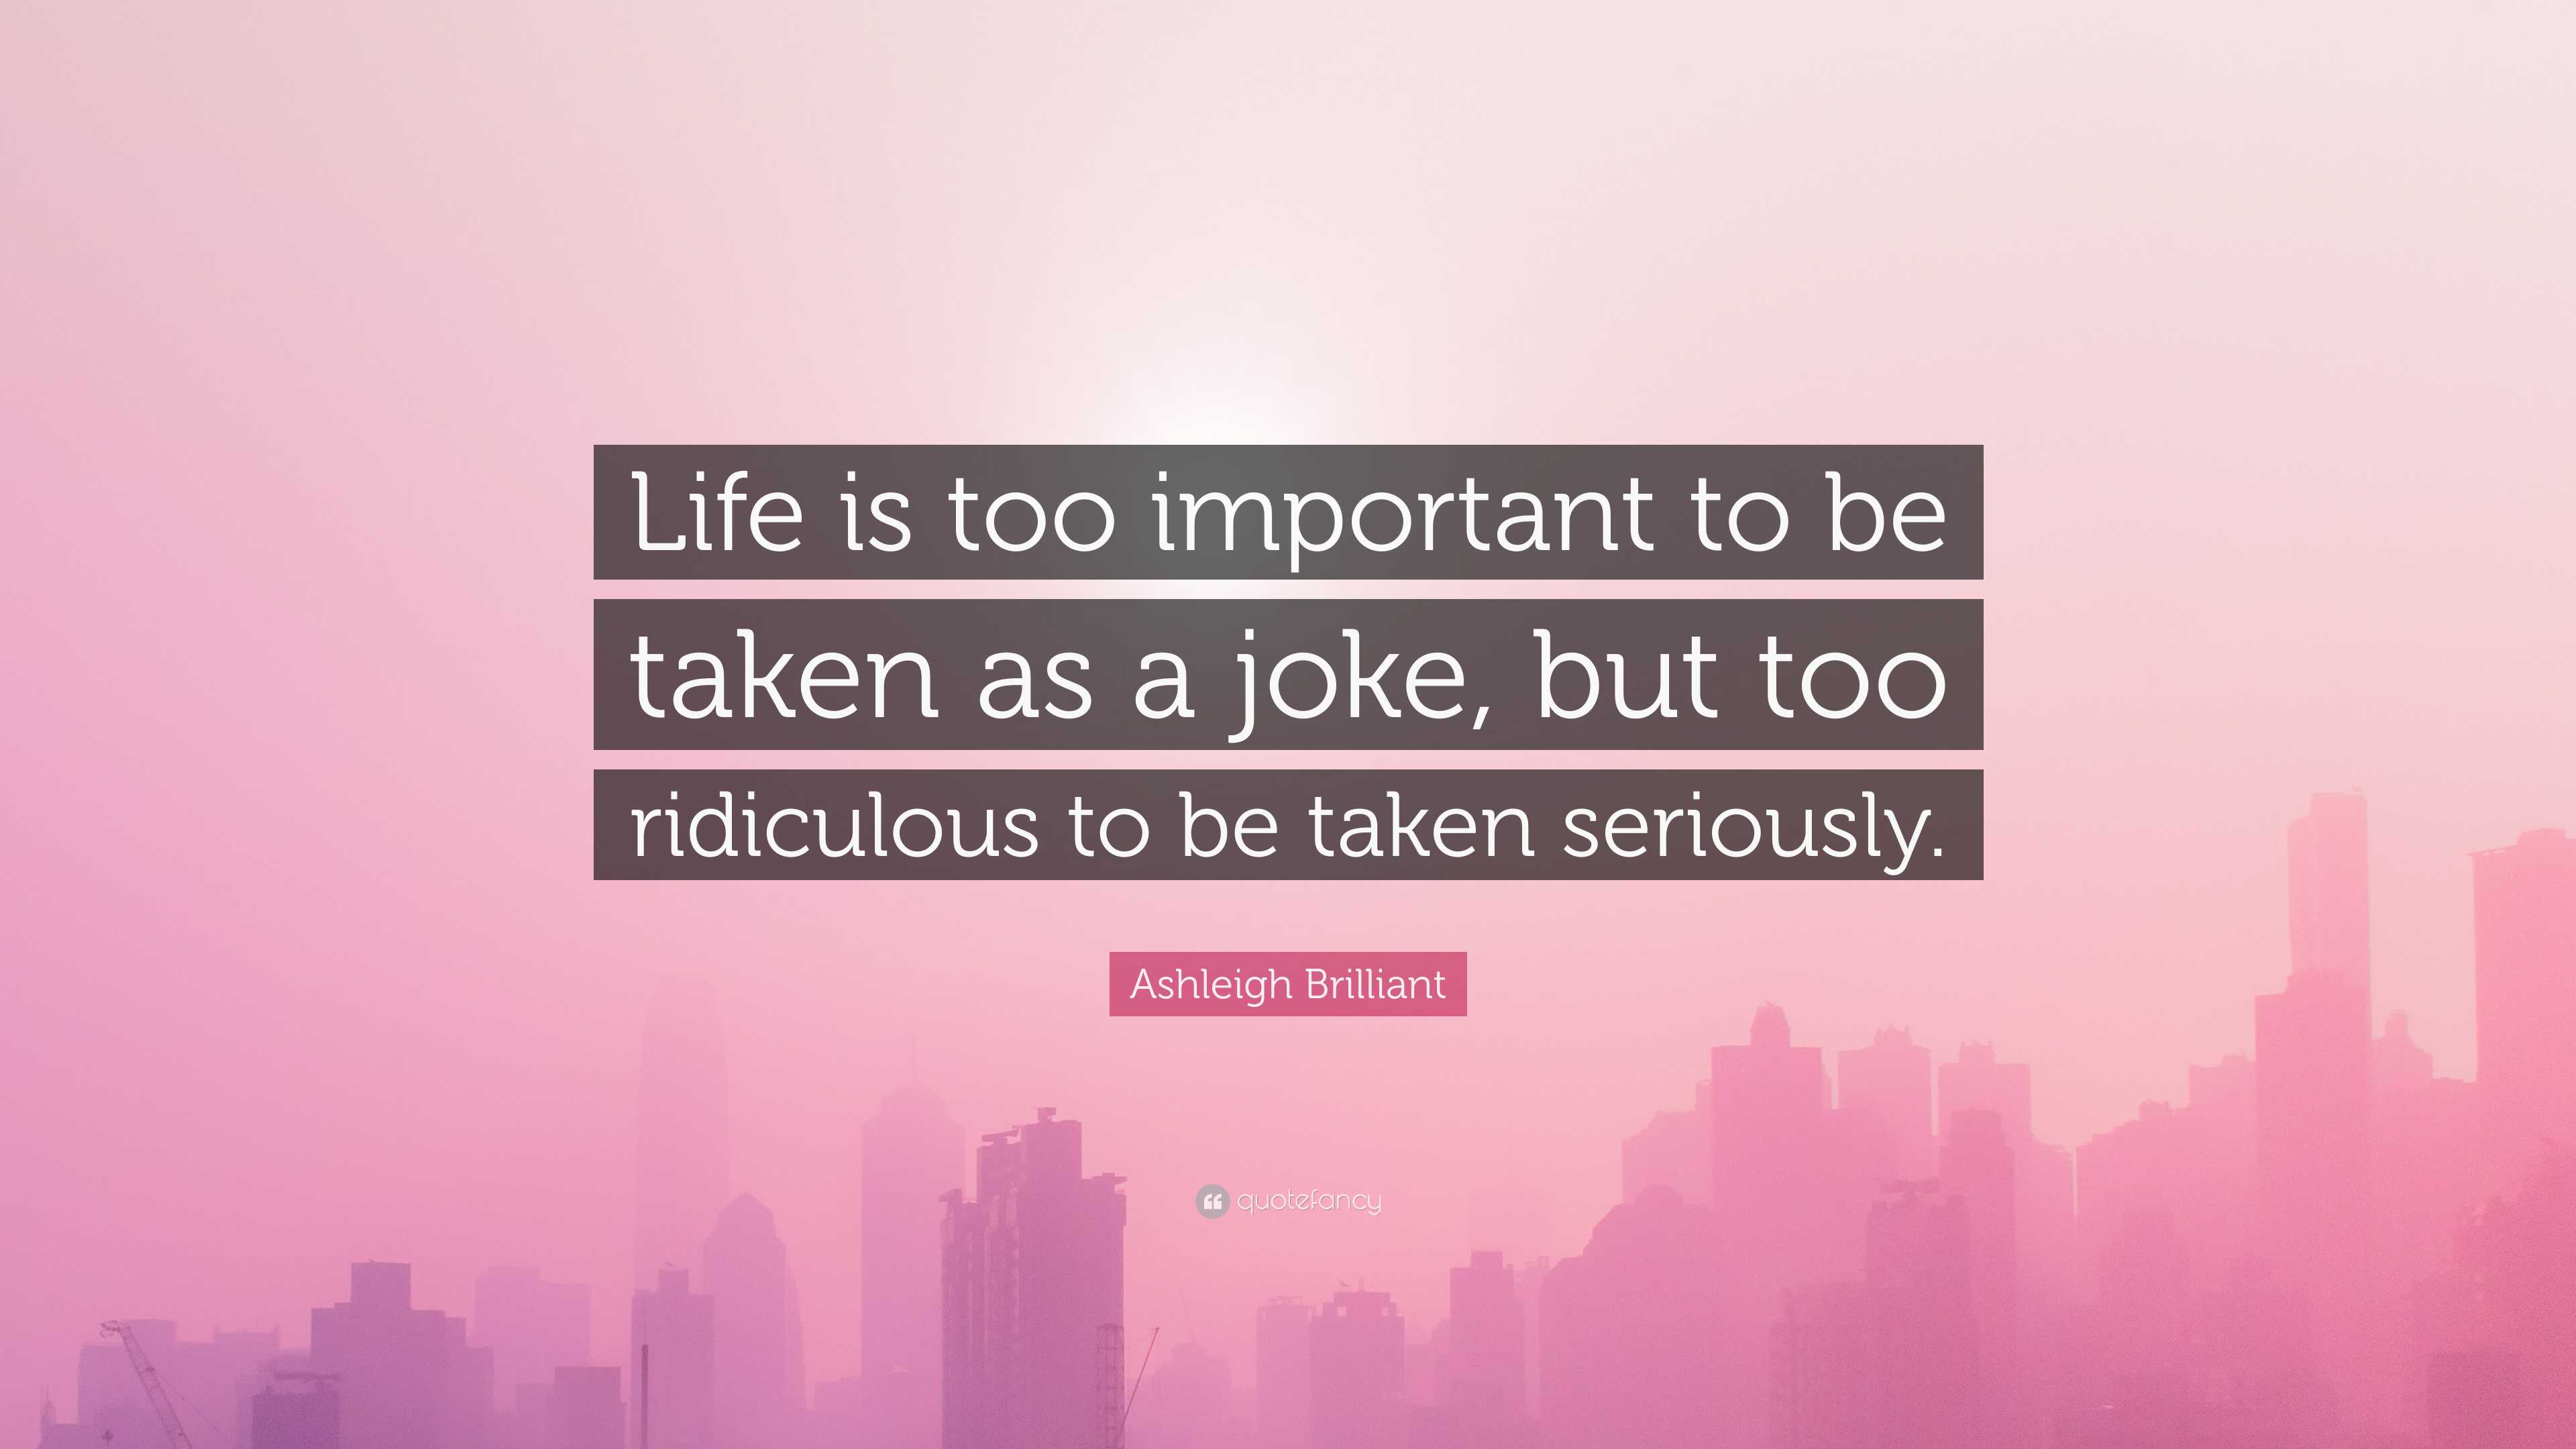 Ashleigh Brilliant Quote: “Life is too important to be taken as a joke ...